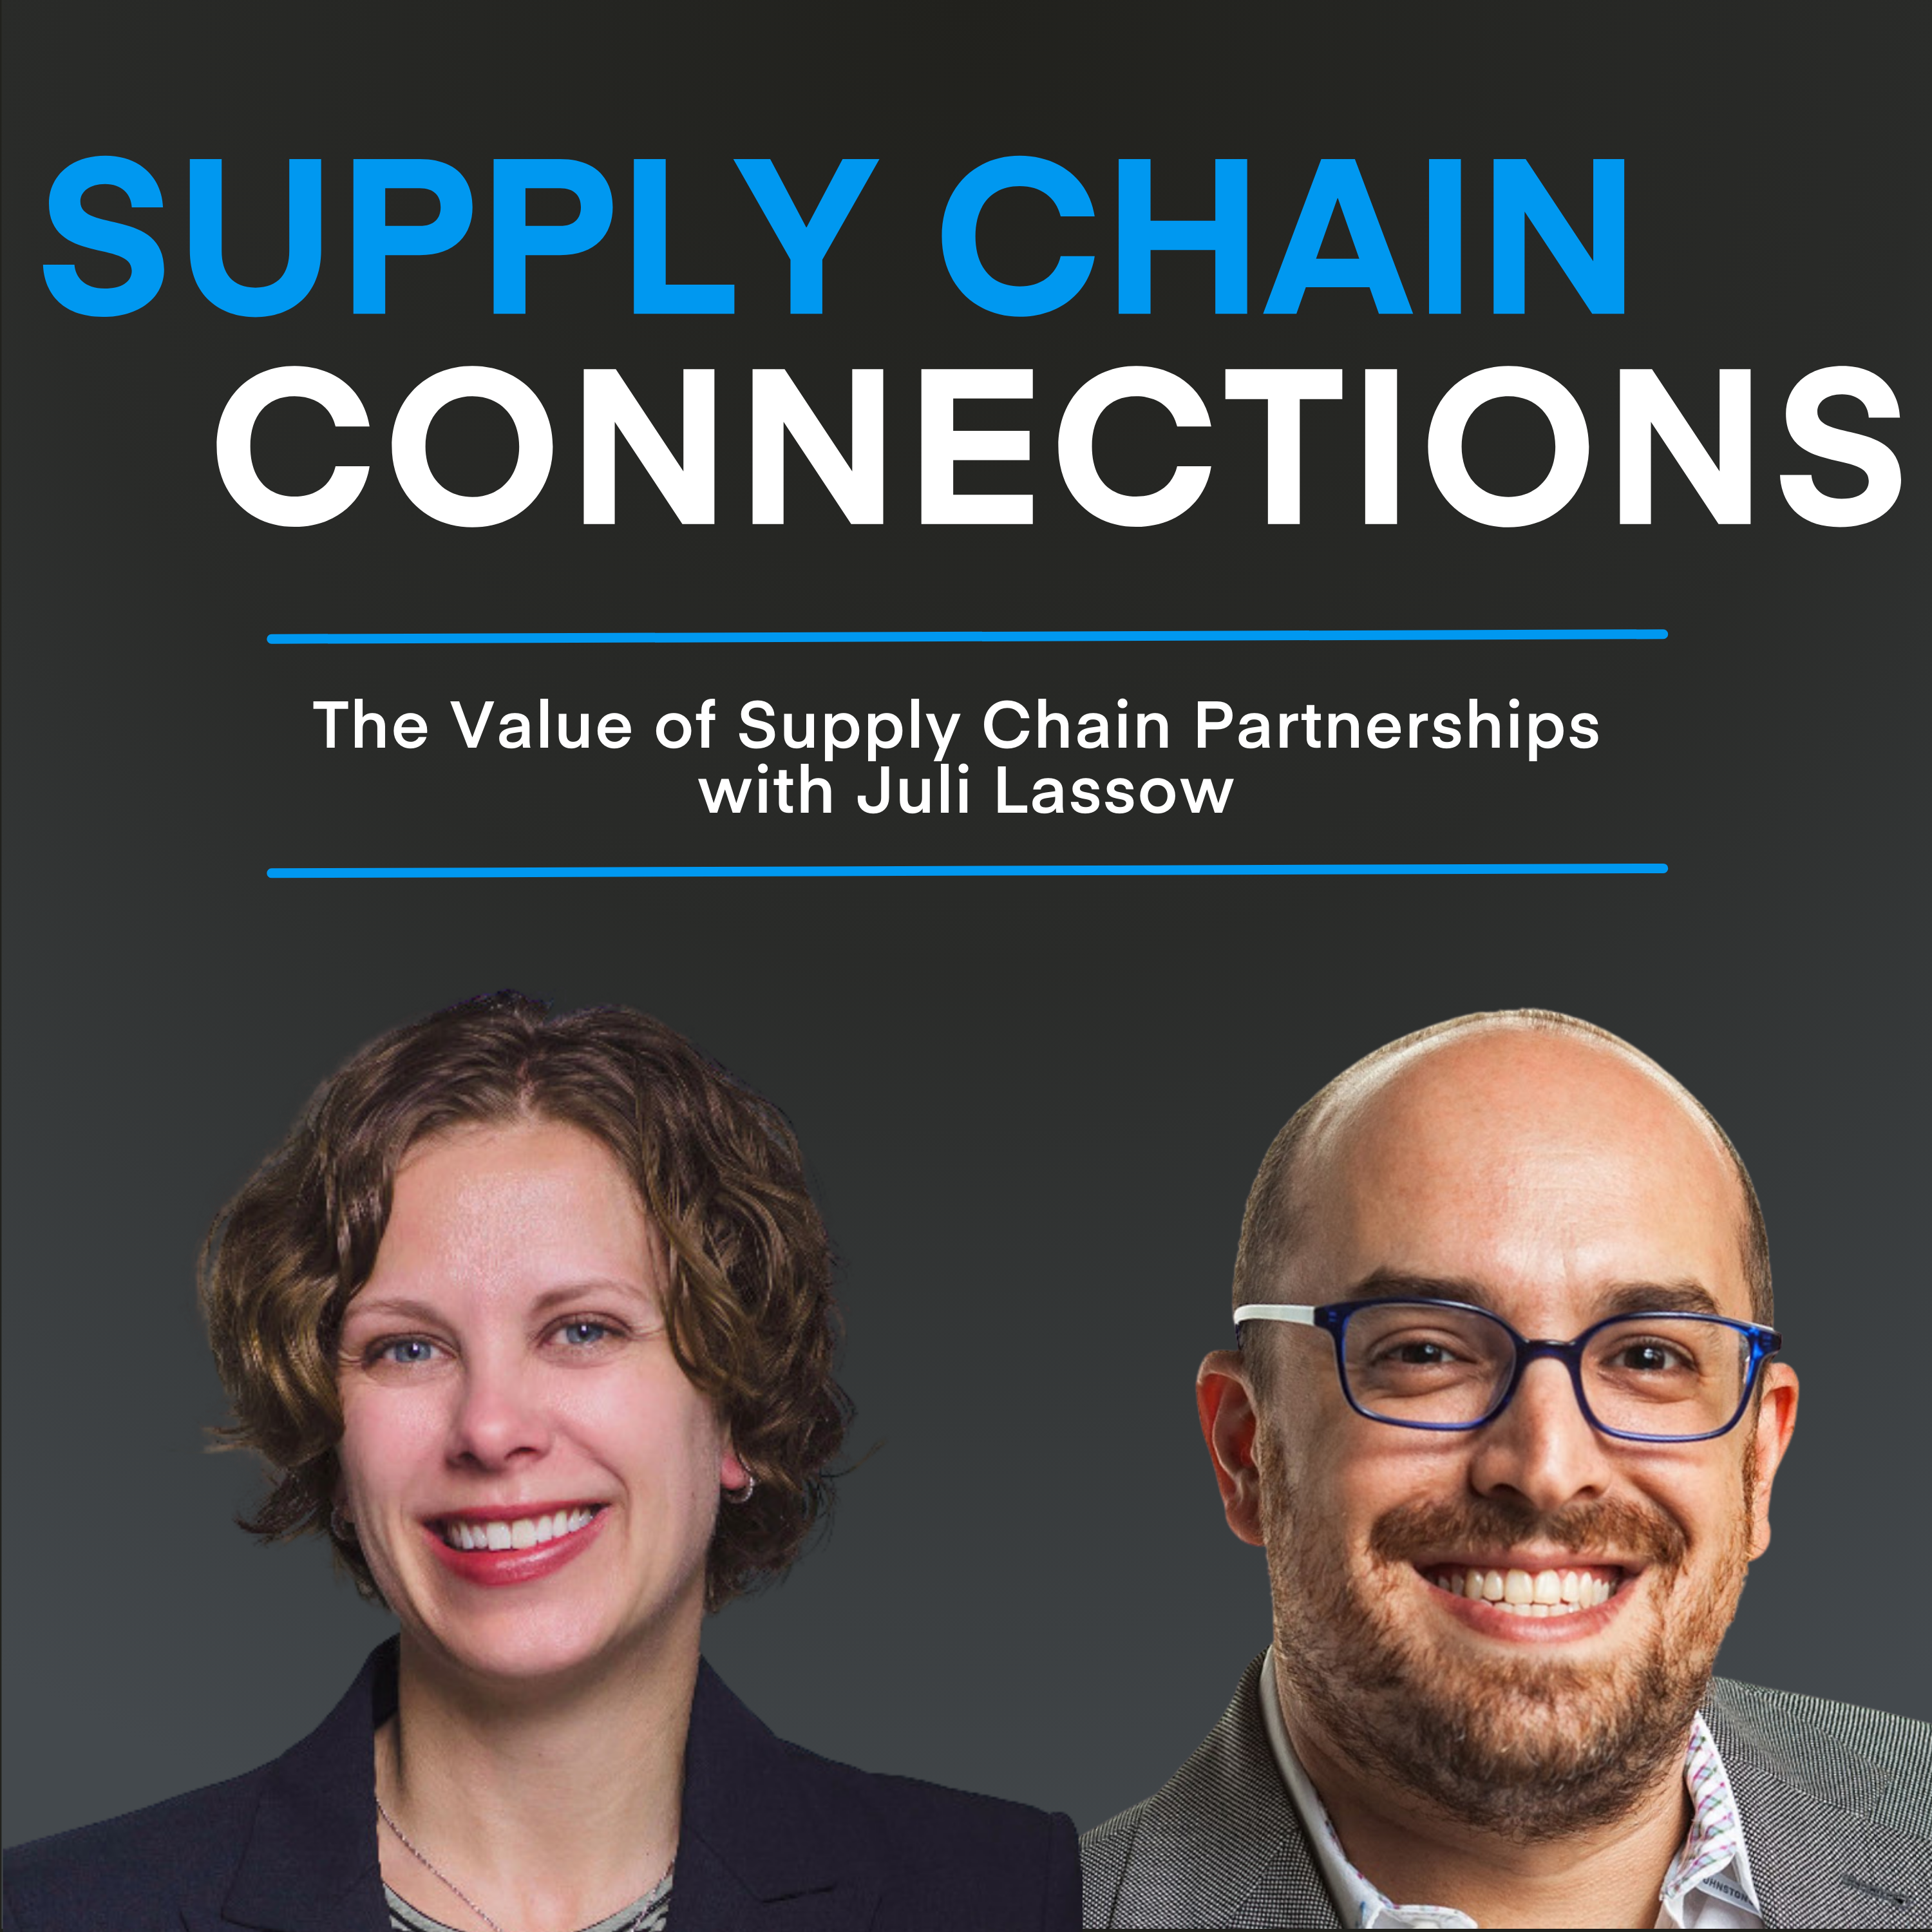 The Value of Supply Chain Partnerships with Juli Lassow on the Chain.io Supply Chain Connections Podcast